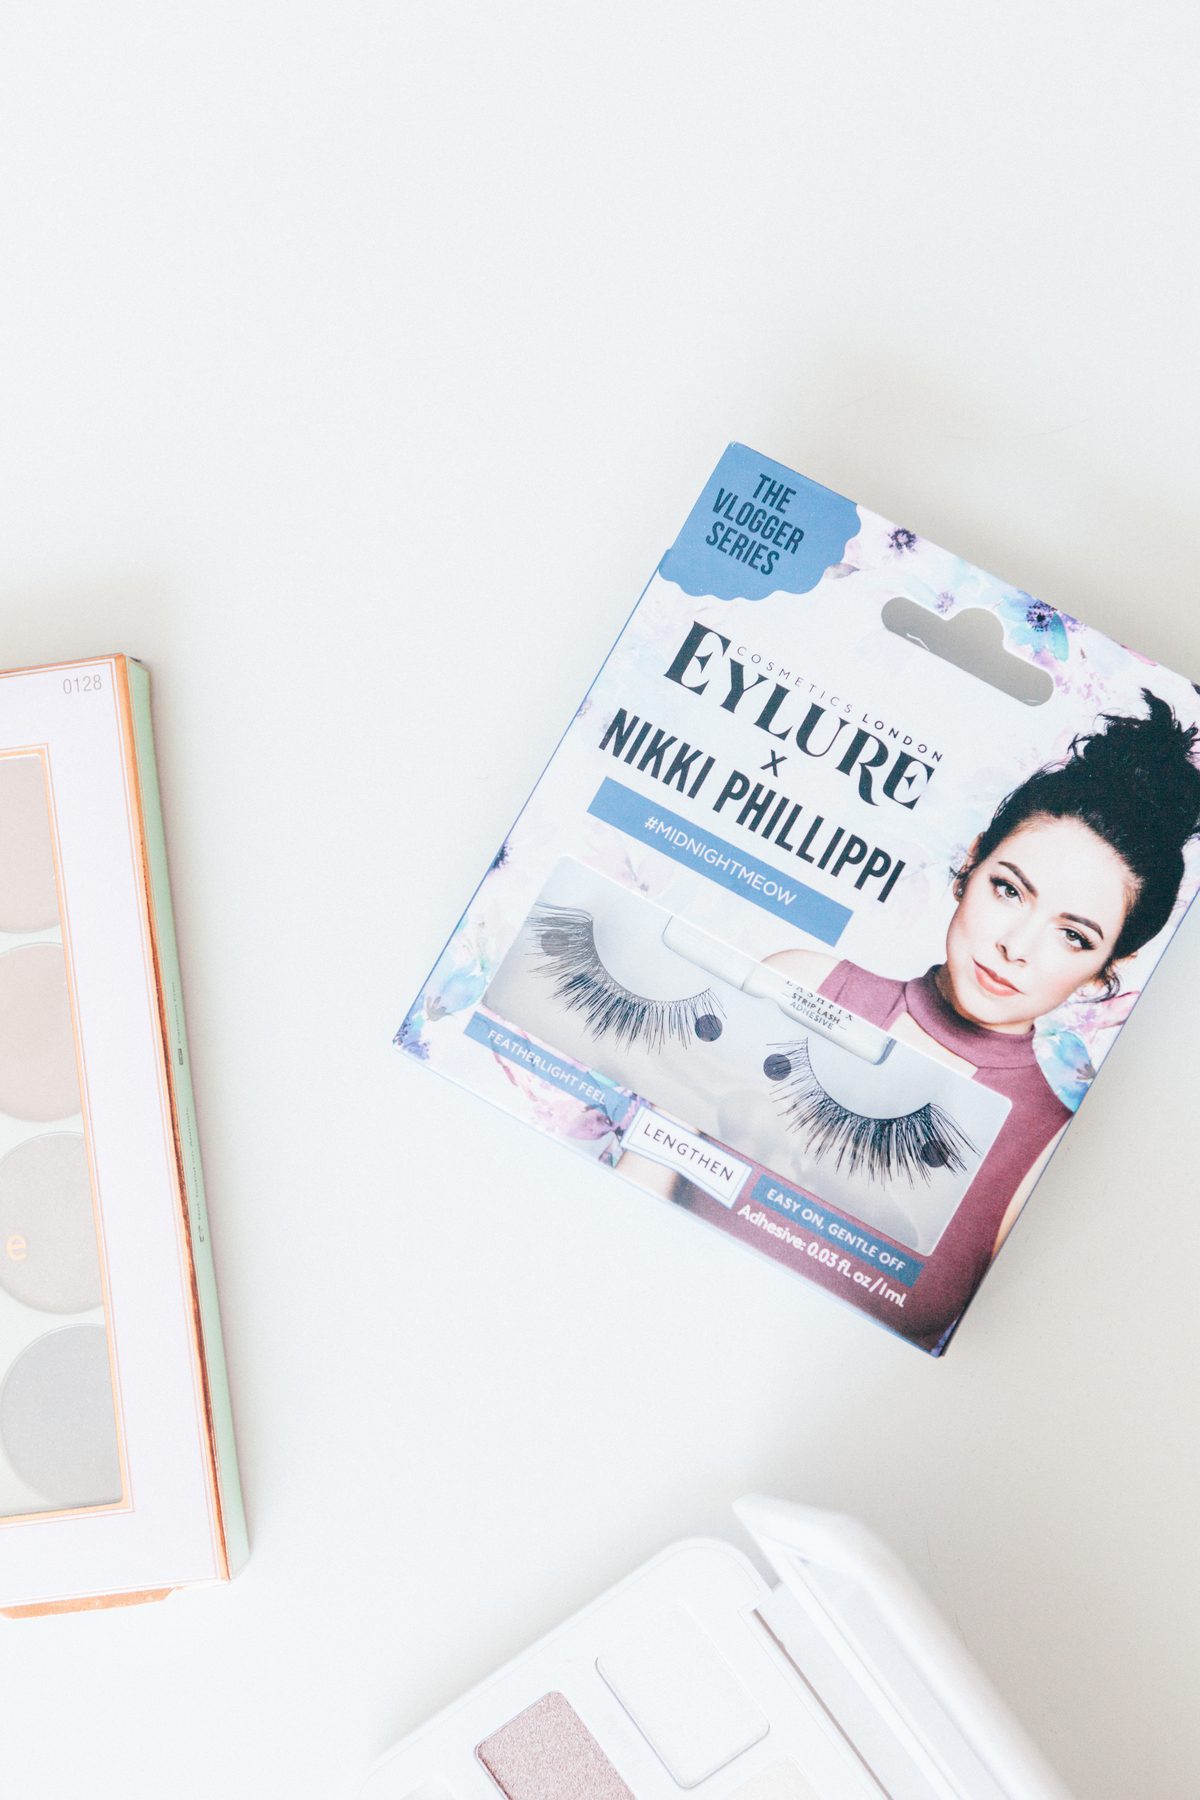 Eylure x Nikki Phillipi #MidnightMeow lashes in a box for makeup guaranteed